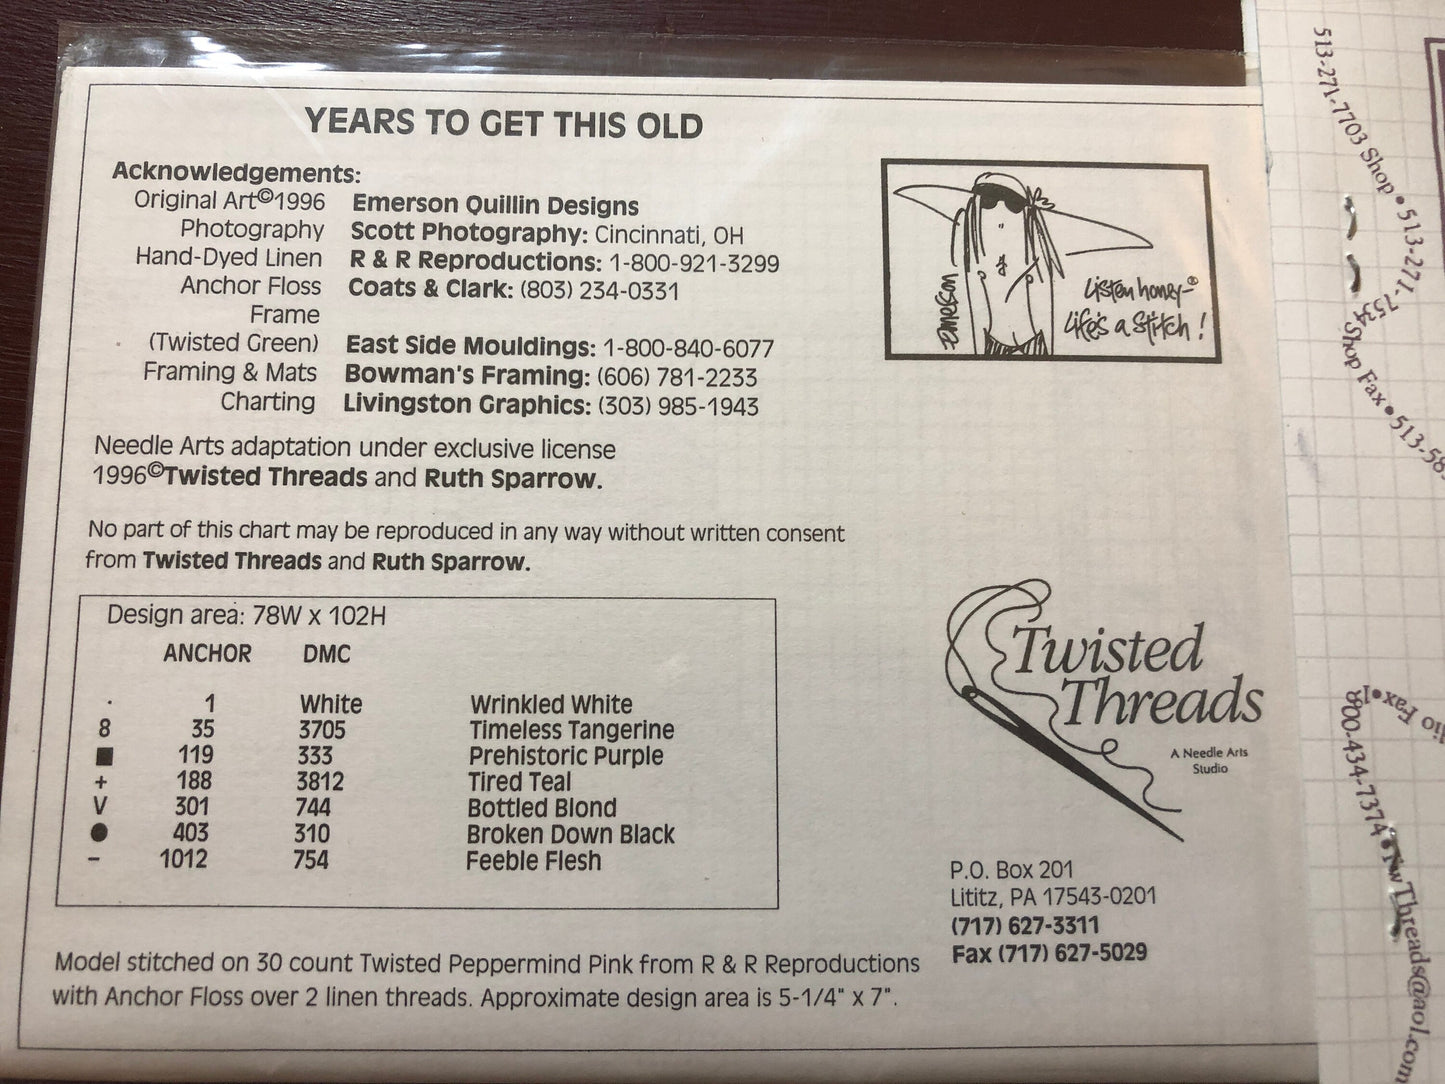 Listen Honey, Life's a Stitch!, Years To Get This Old, Twisted Threads, Vintage 1996, Counted, Cross Stitch Pattern